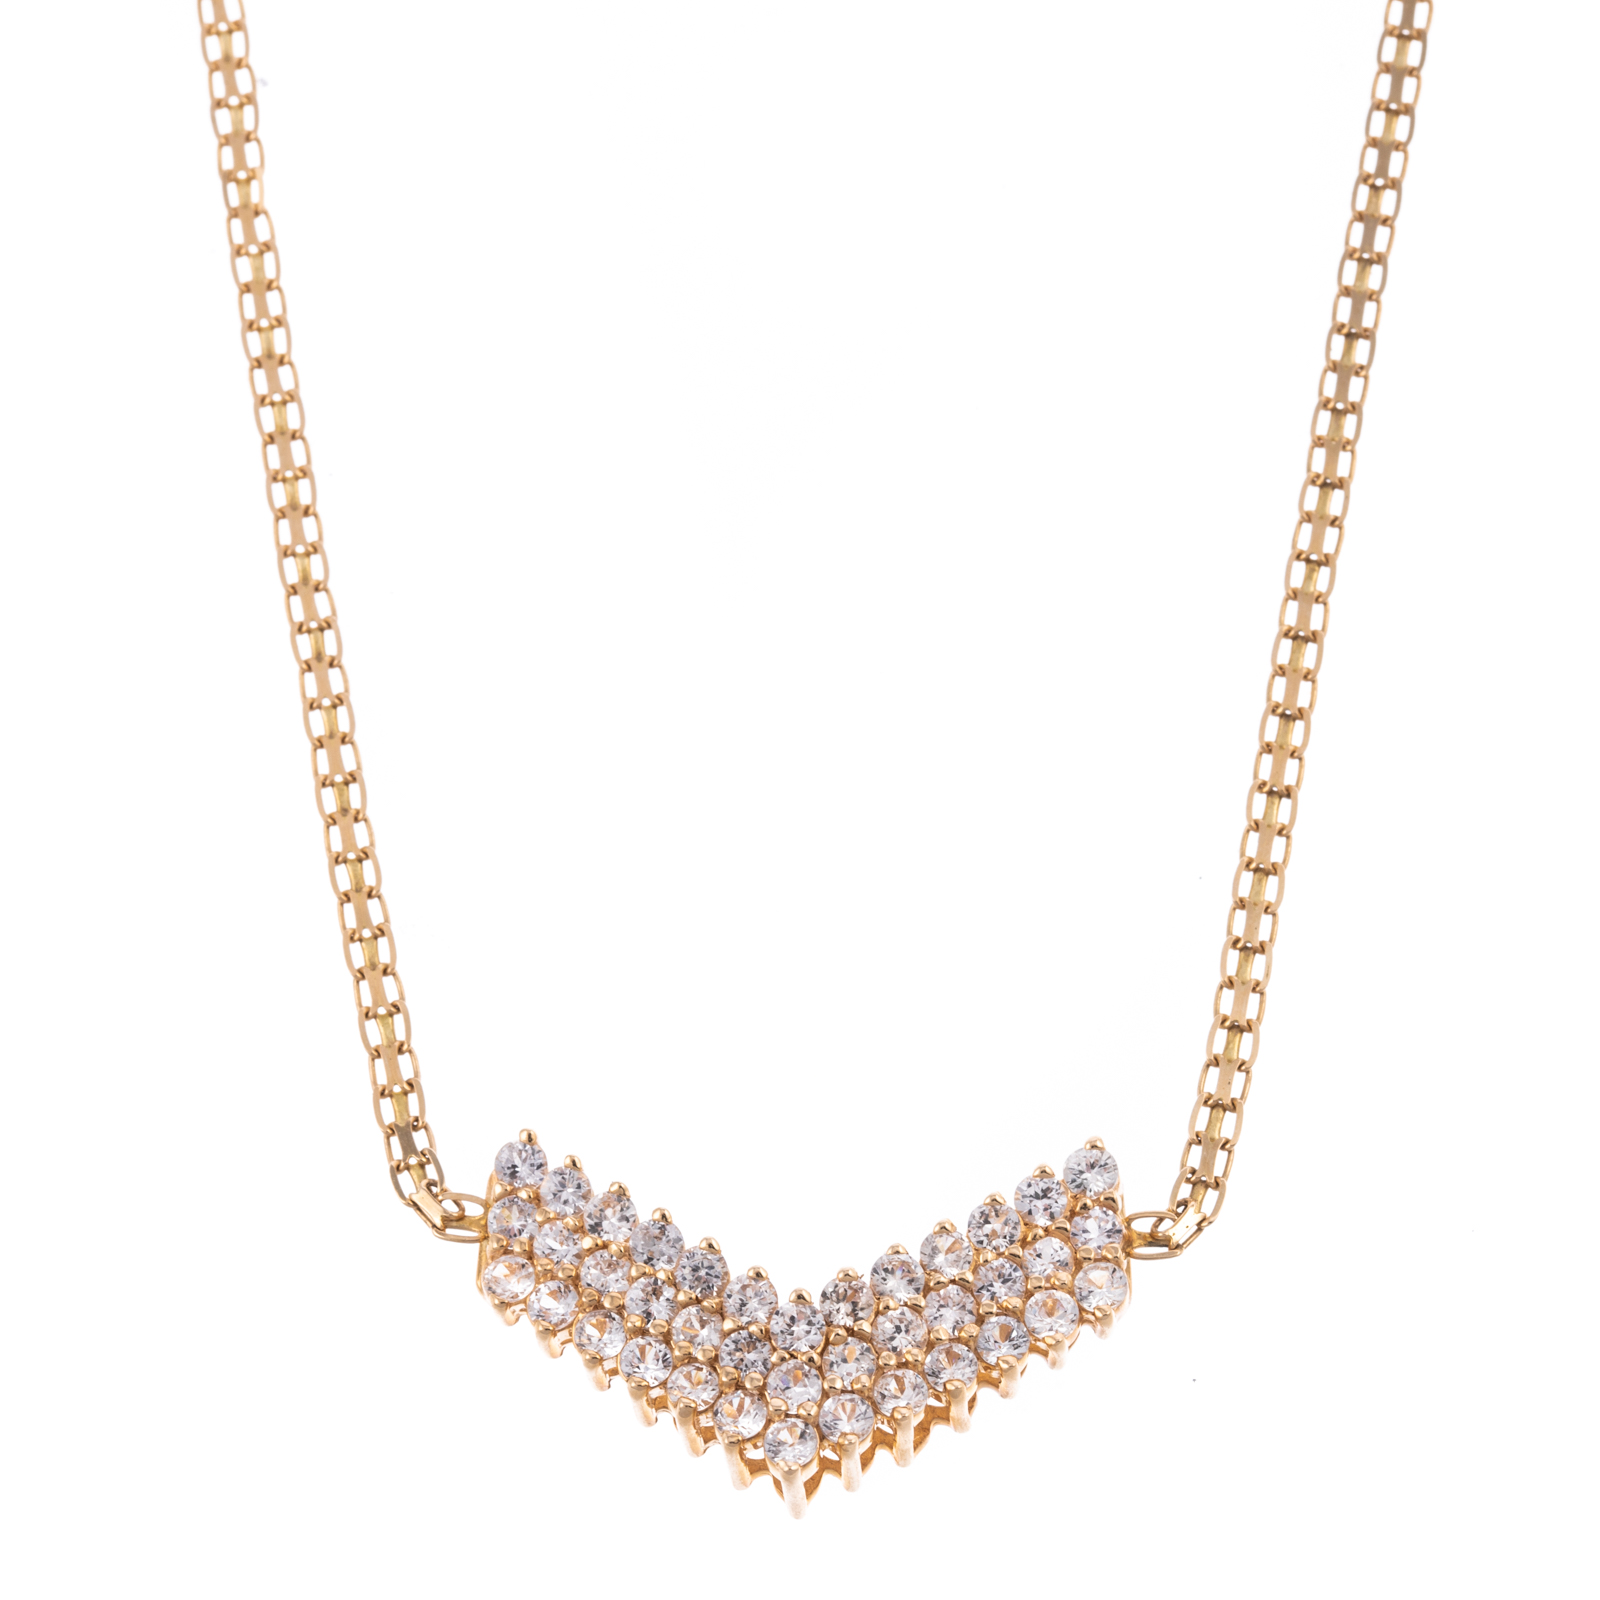 A WHITE SAPPHIRE V NECKLACE IN 288cd4